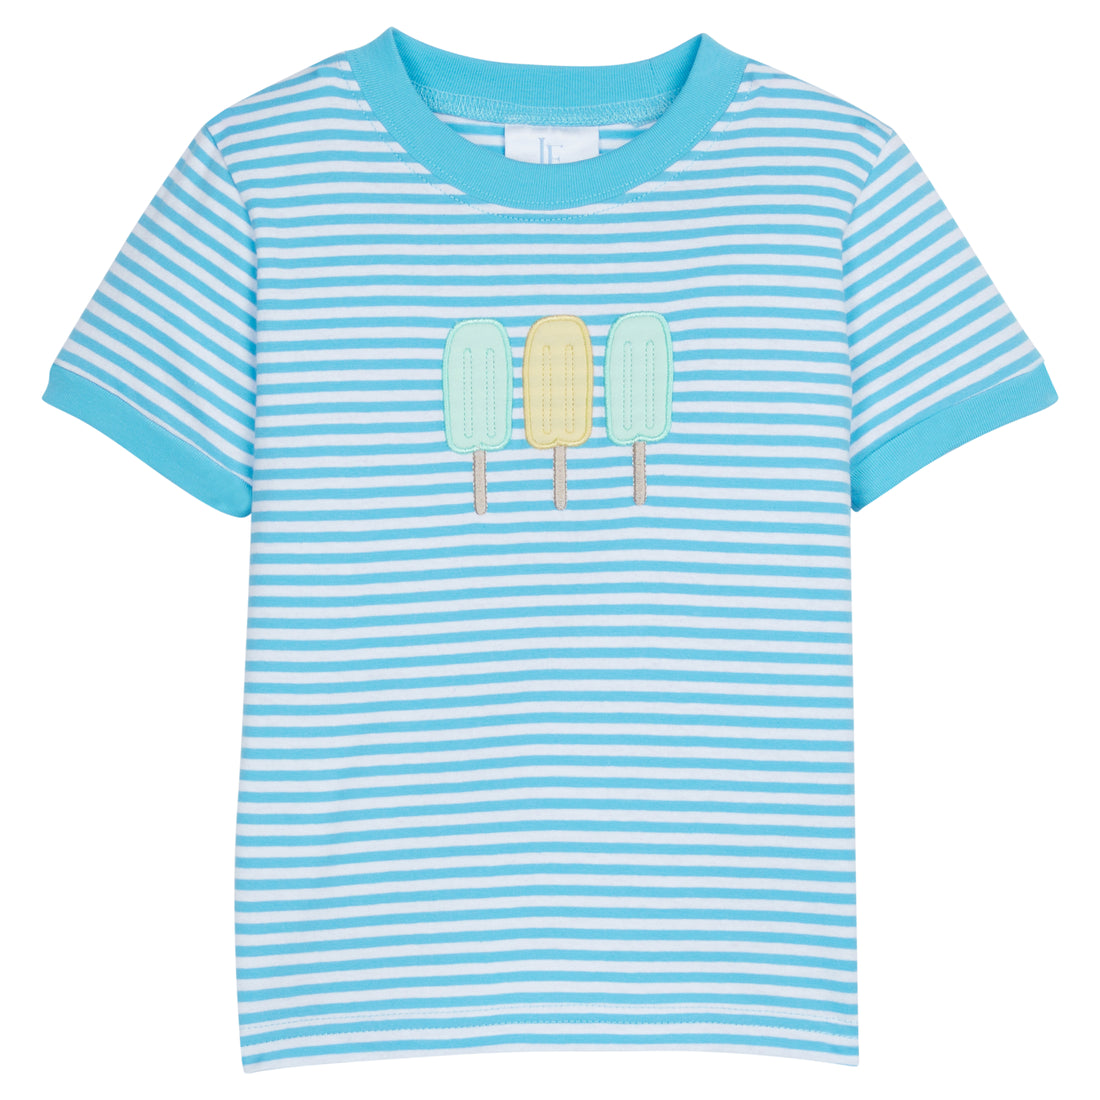 Little English classic children’s clothing, boys aqua blue short-sleeve striped t-shirt with three applique popsicles